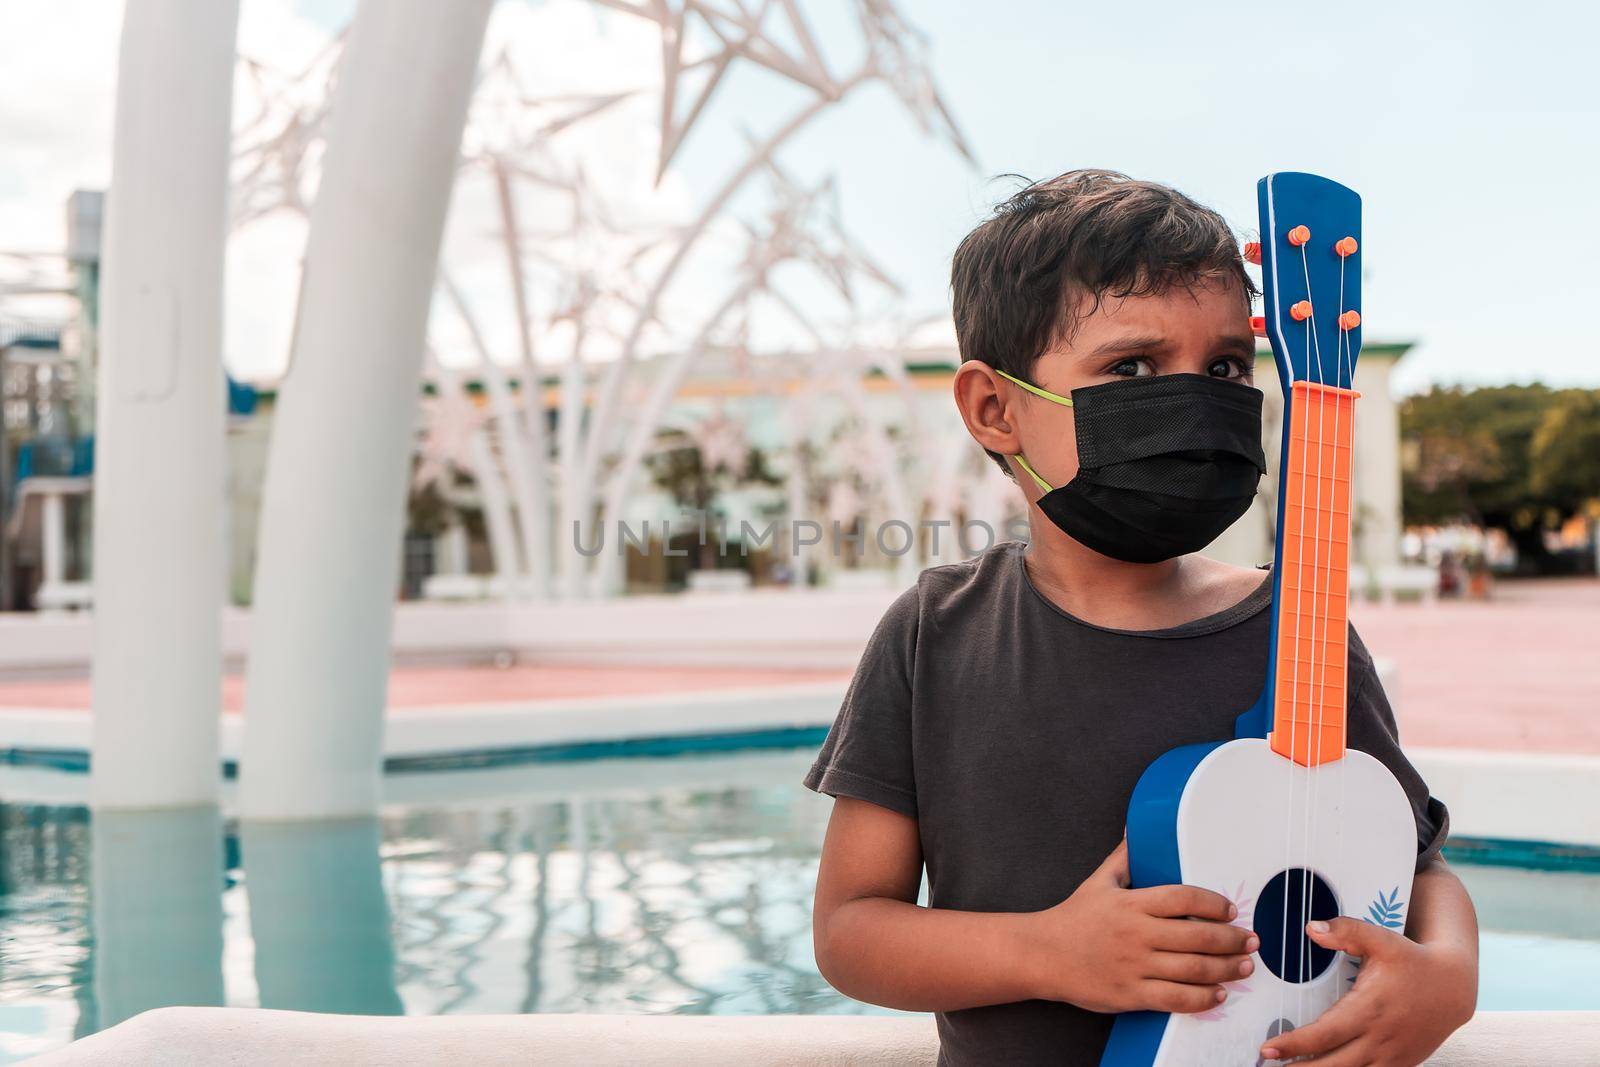 Latin boy outdoors with a medical mask and holding a ukulele in his hands. Concepts of musical training in childhood.